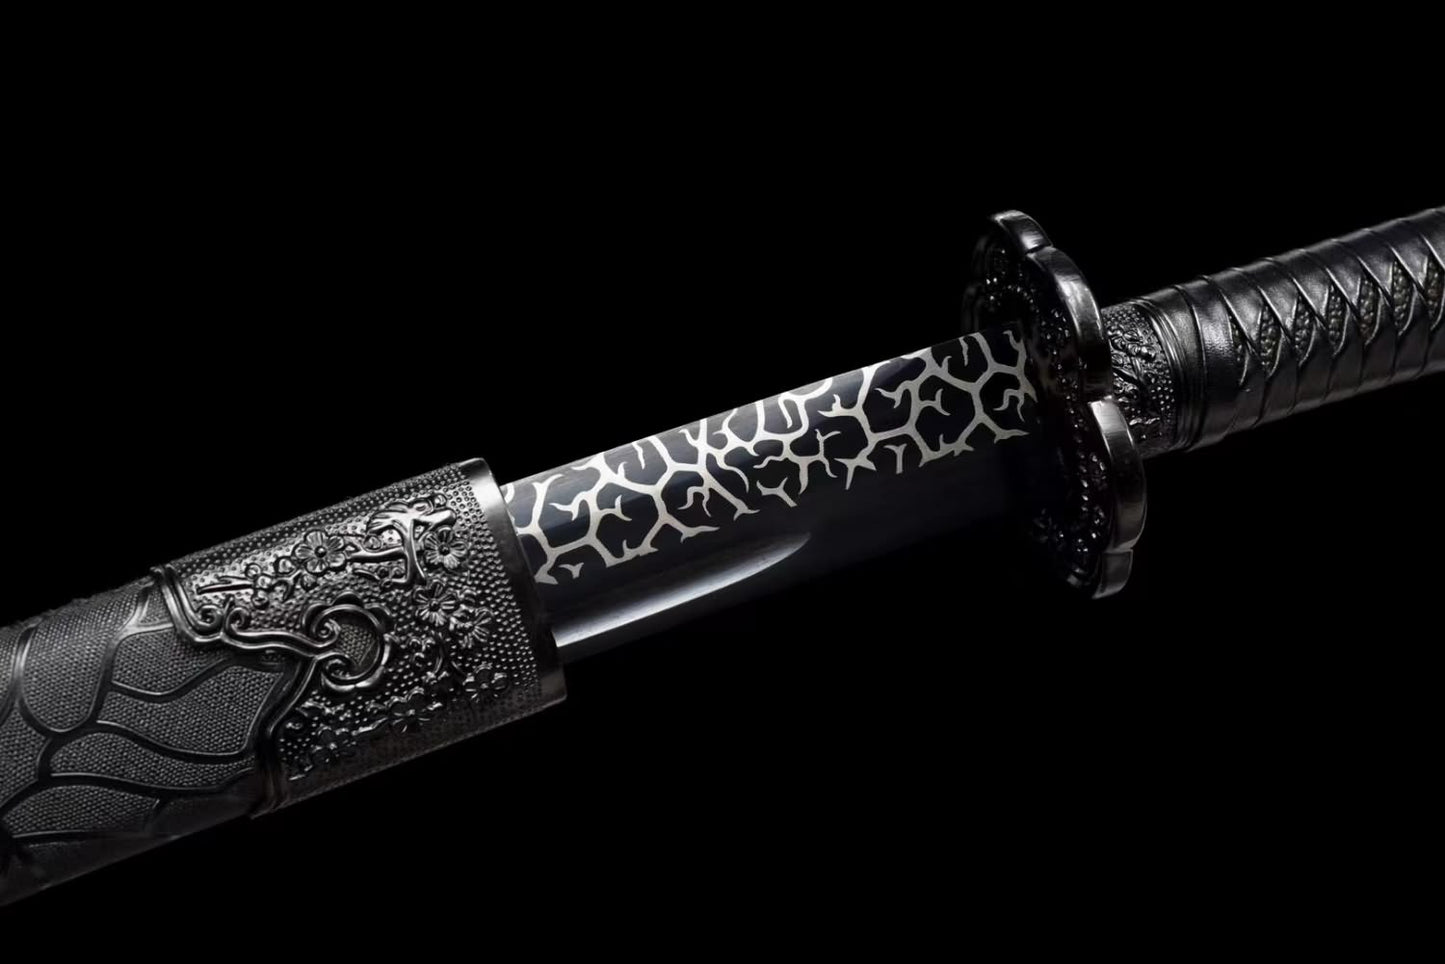 Qing dao Sword,Forged High Carbon Steel Black Blade,Solid Wood Wrapped Faux Leather Scabbard,Alloy Fittings